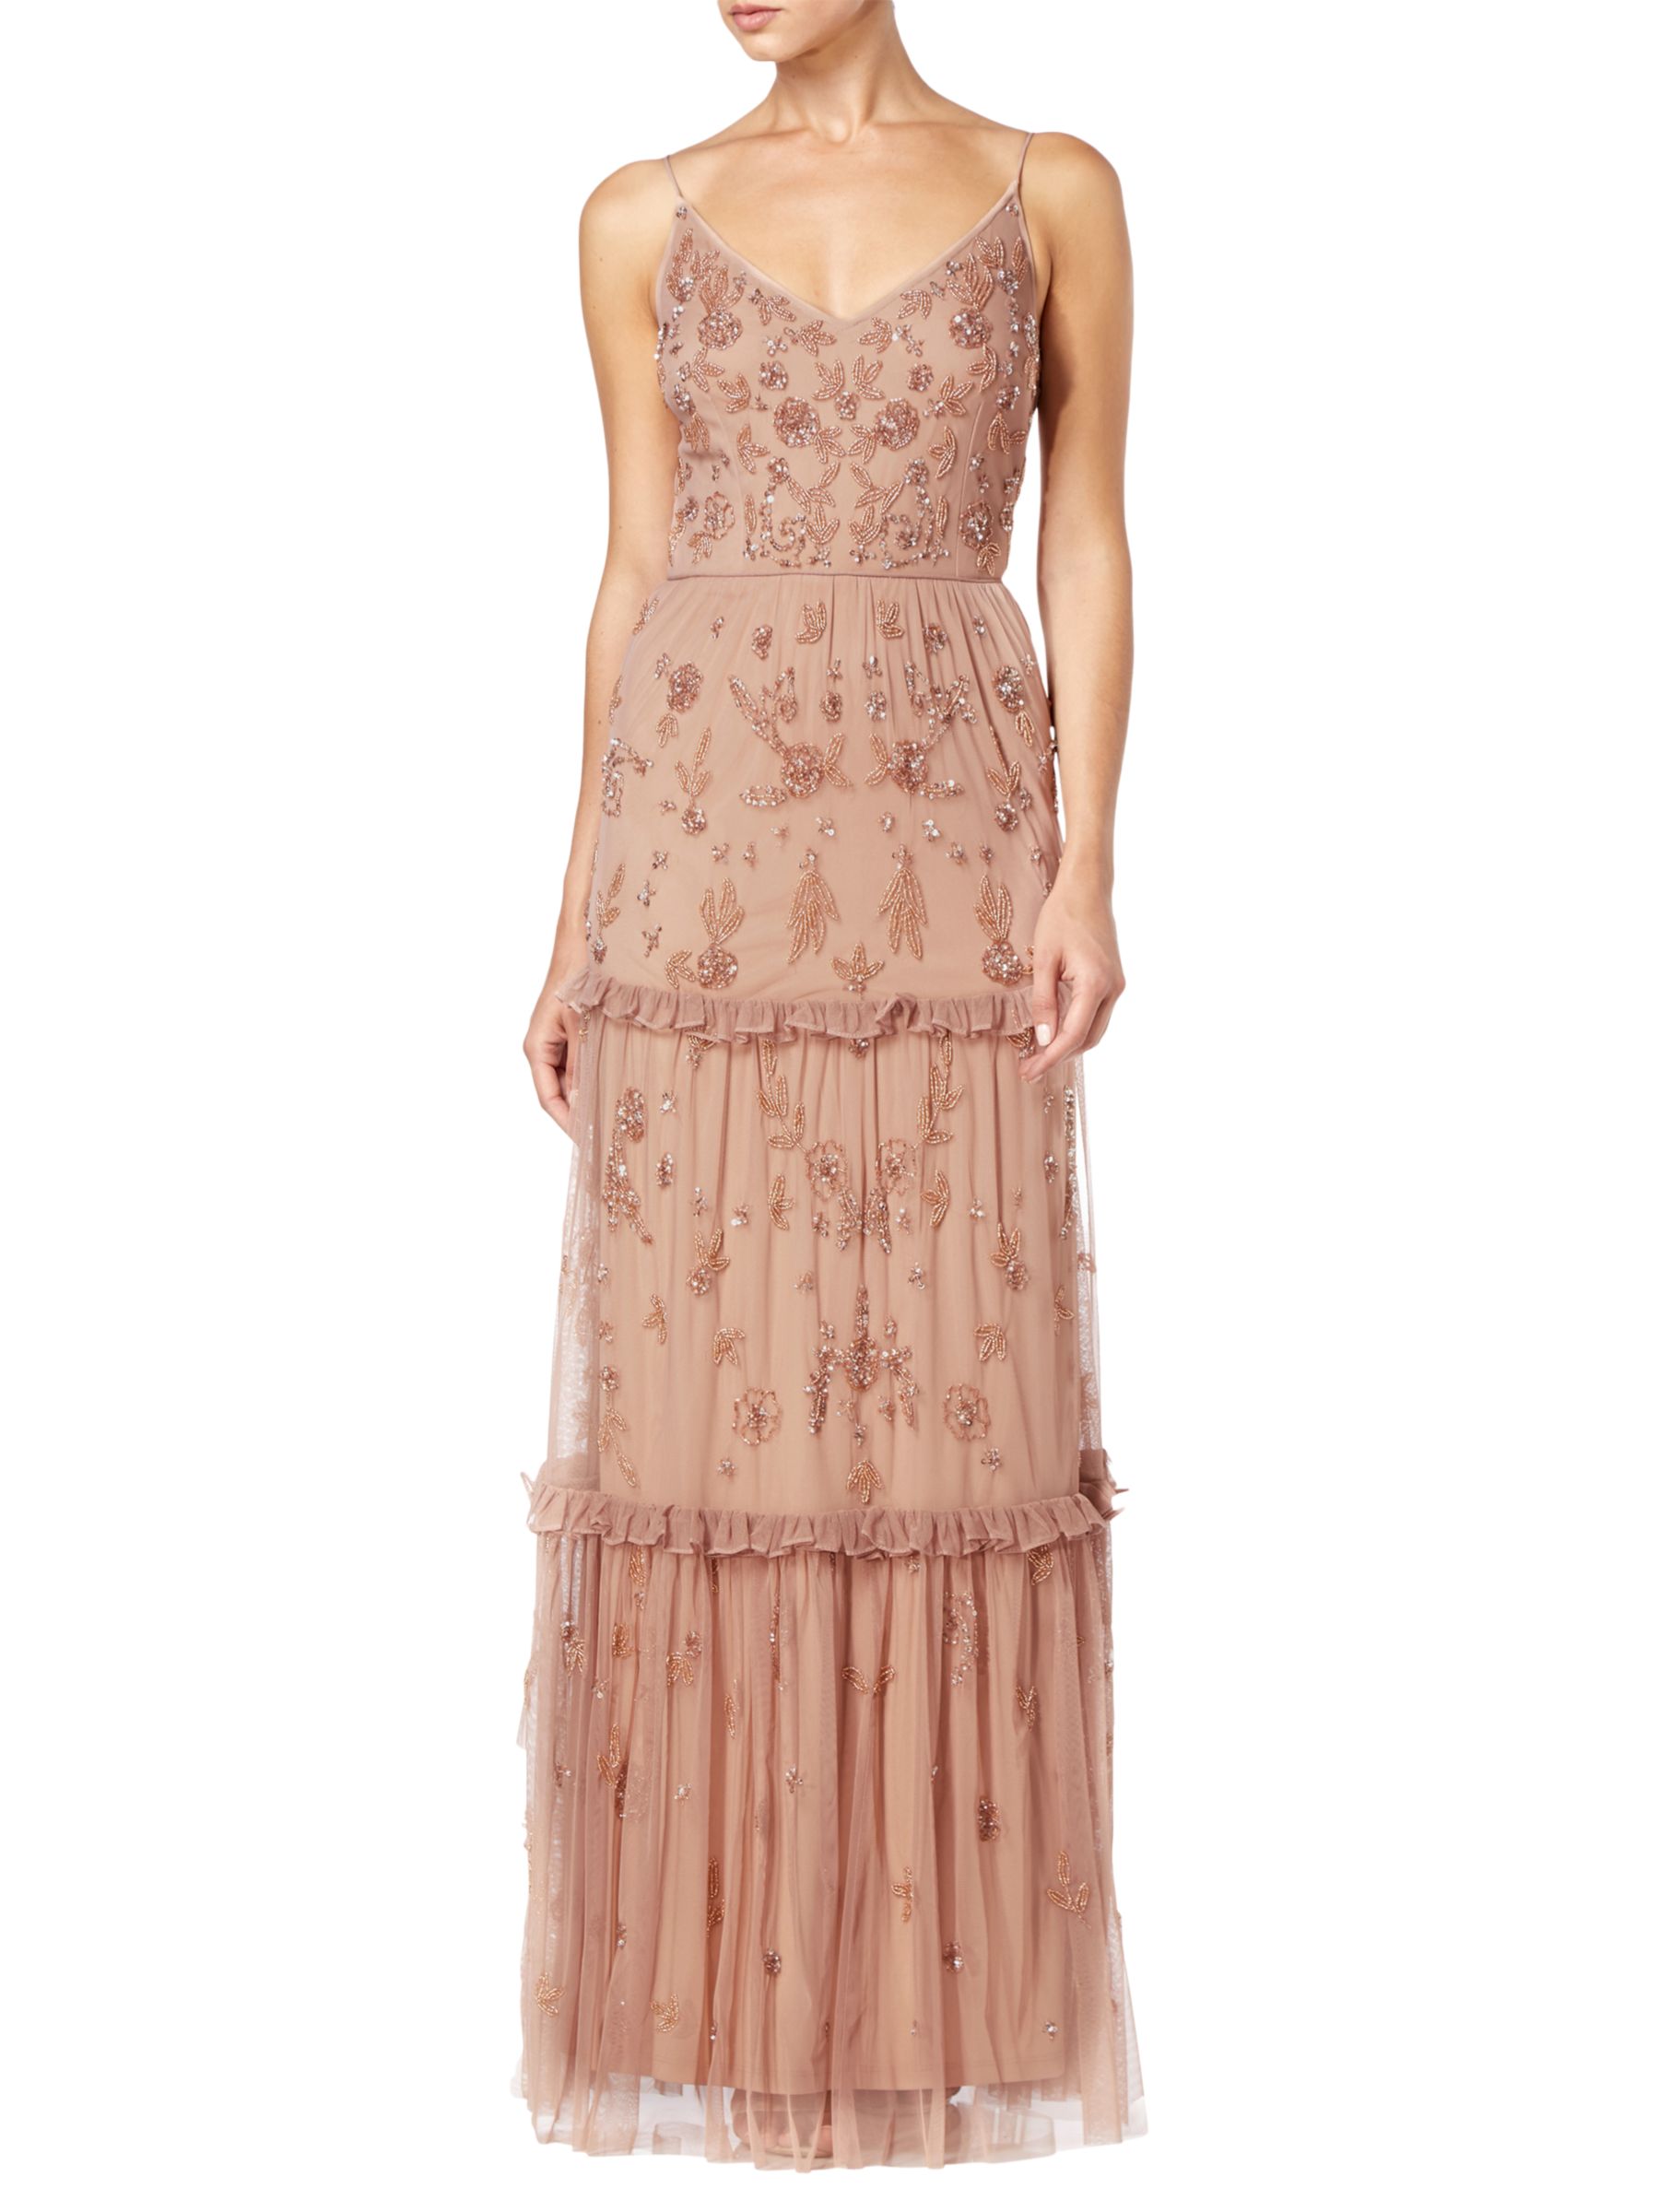 Adrianna Papell Tiered Dress, Rose Gold at John Lewis & Partners